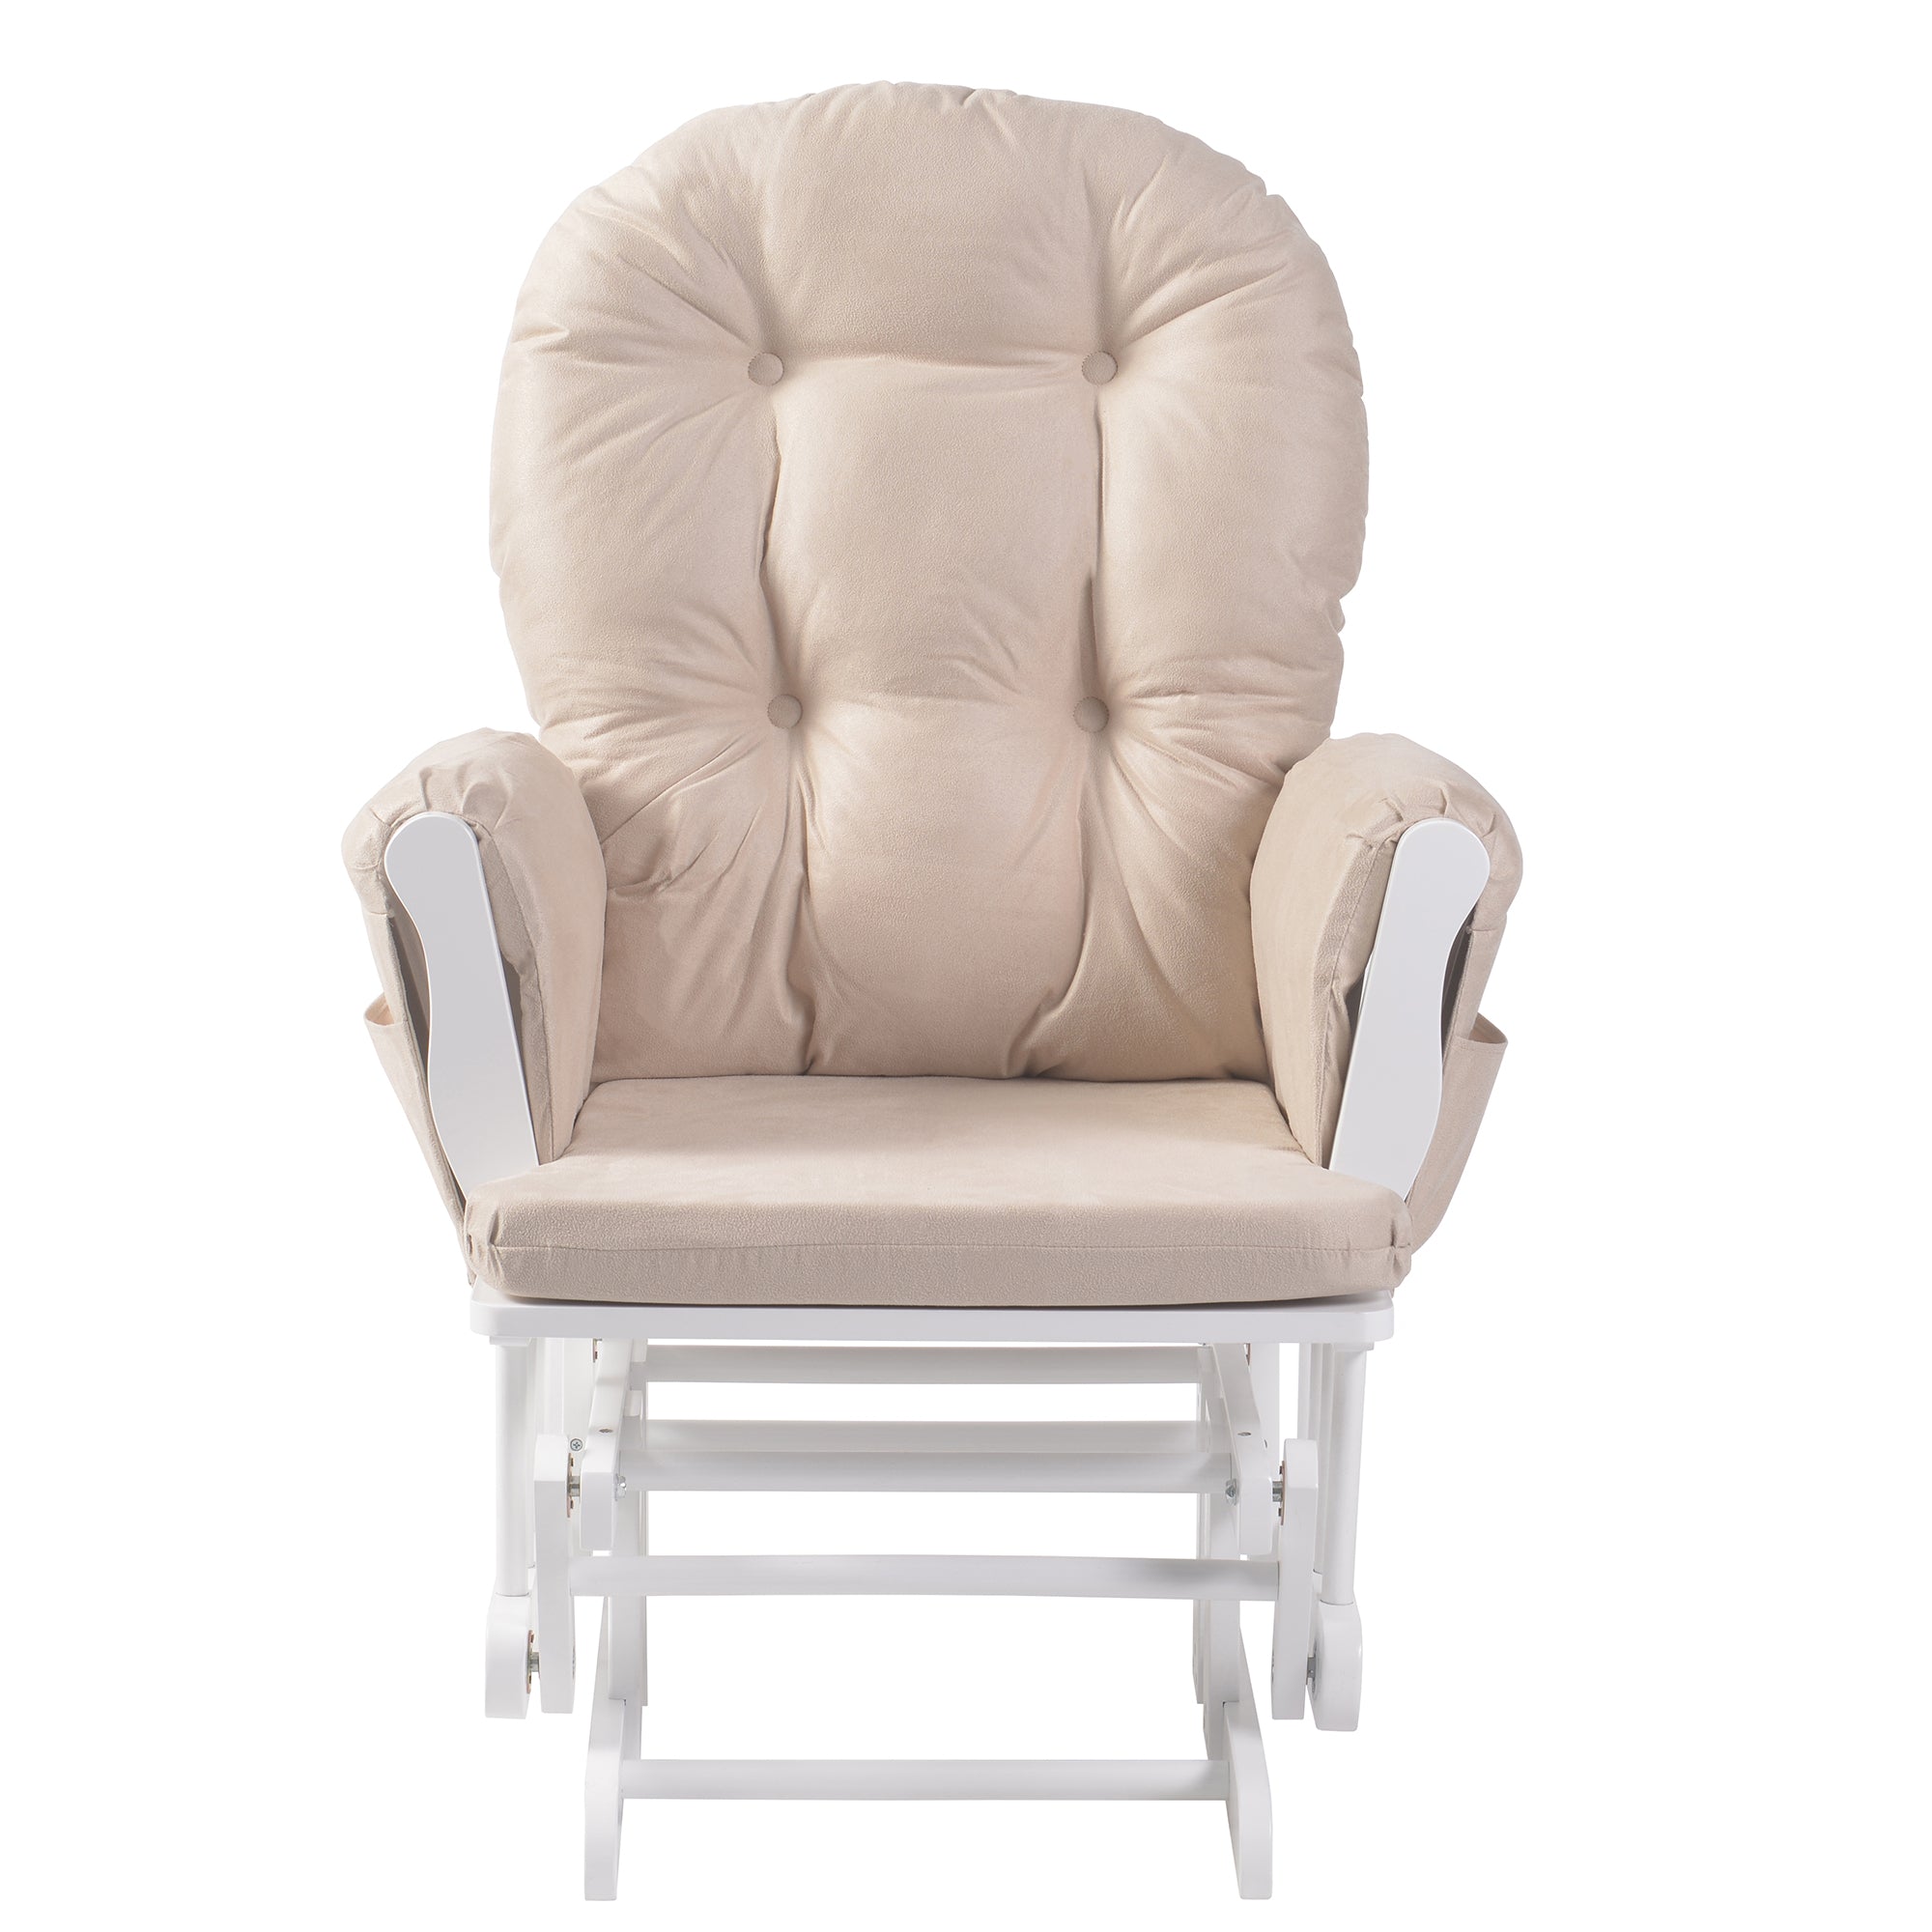 Haywood Nursing Chair - 15% OFF Applied at Checkout